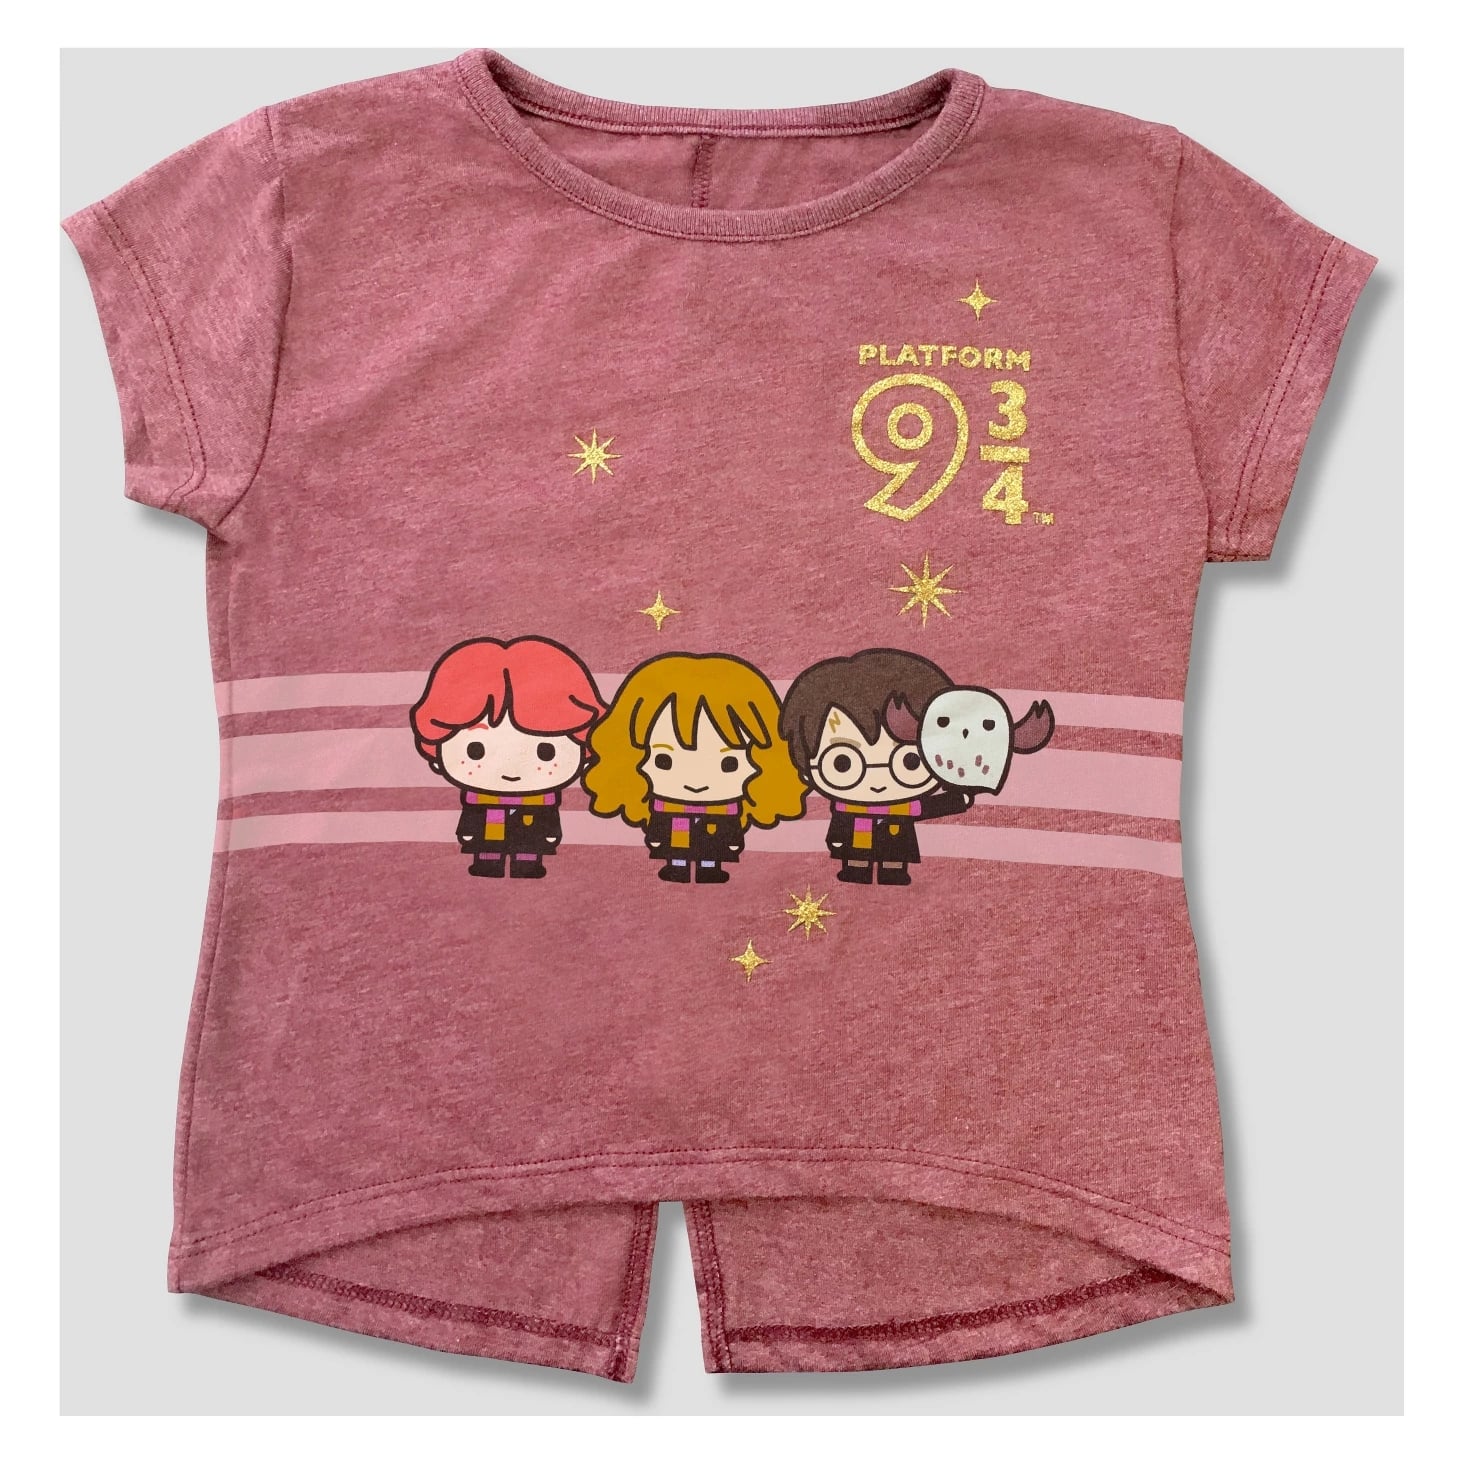 over het algemeen mythologie transfusie Toddler Girls' Harry Potter Short Sleeve T-Shirt | Harry Potter Kids'  Clothes Are 30% Off at Target, but This Deal Has a Catch | POPSUGAR Family  Photo 11